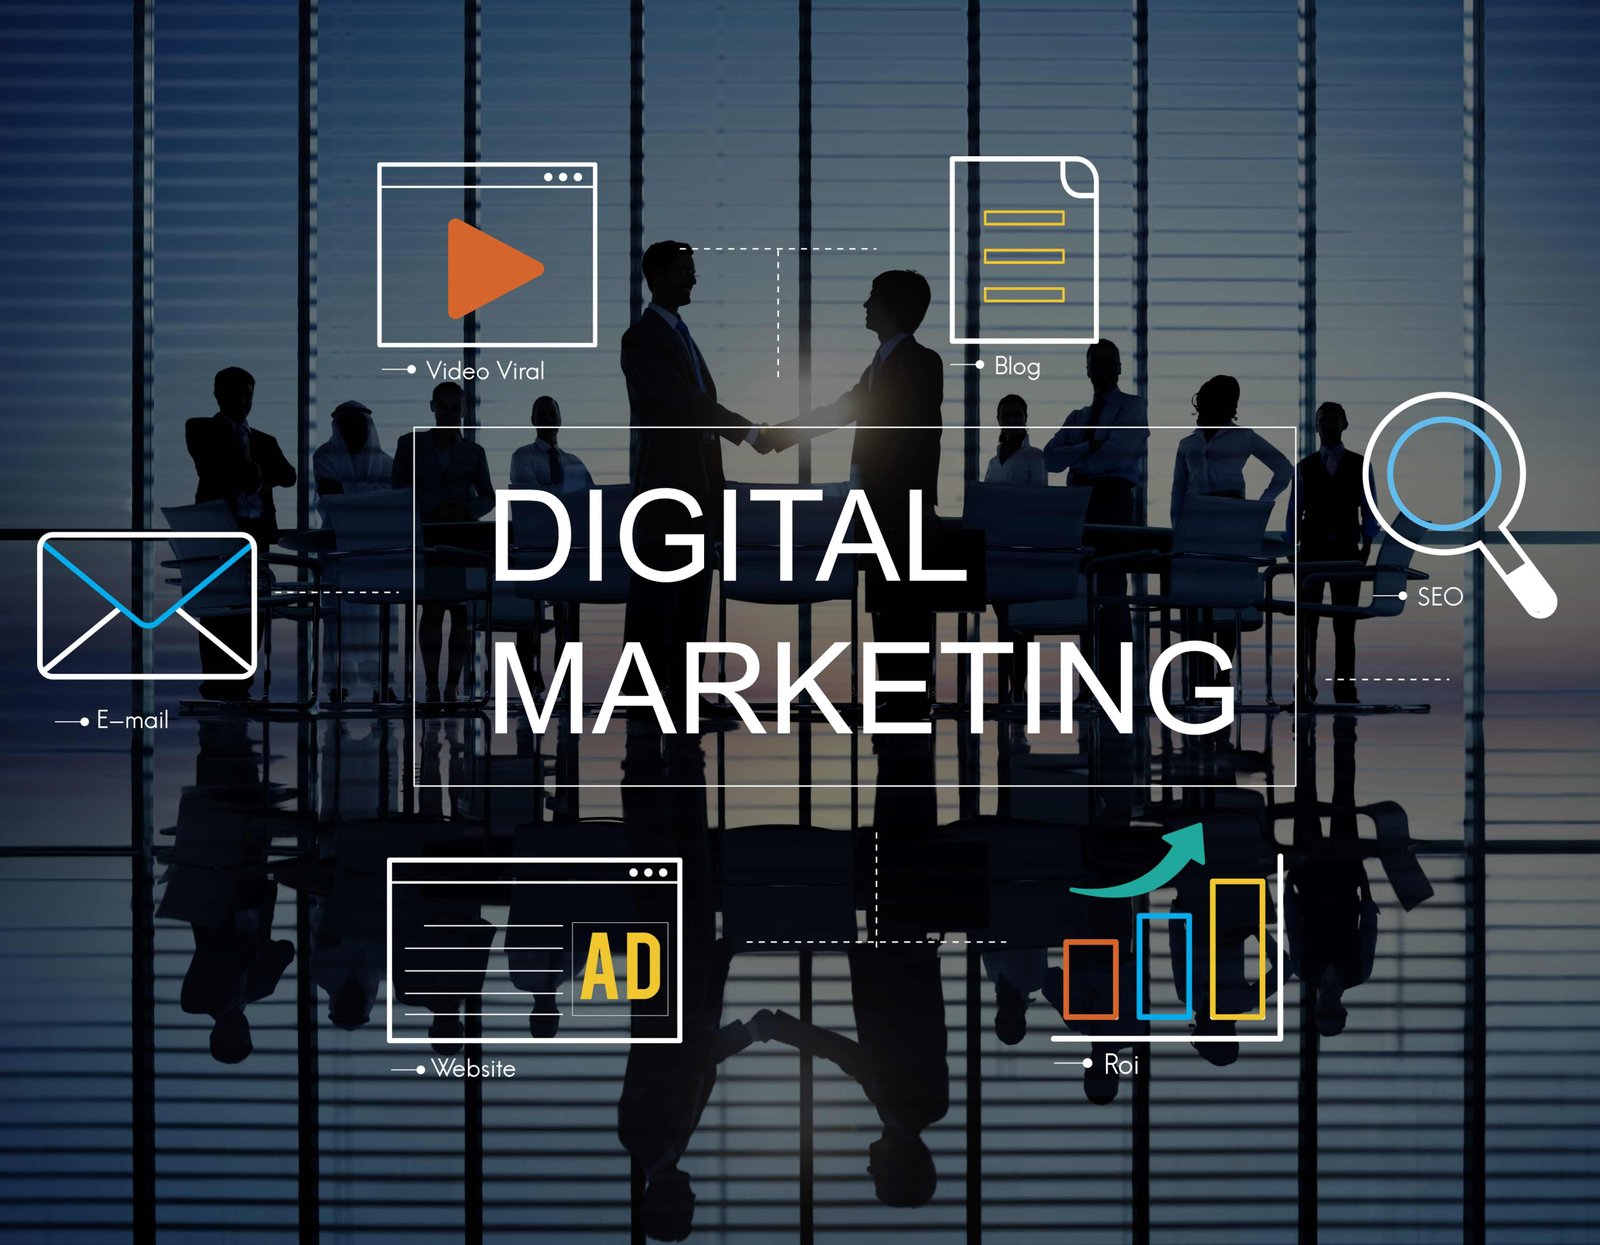 digital-marketing-with-icons-business-people-min (1)